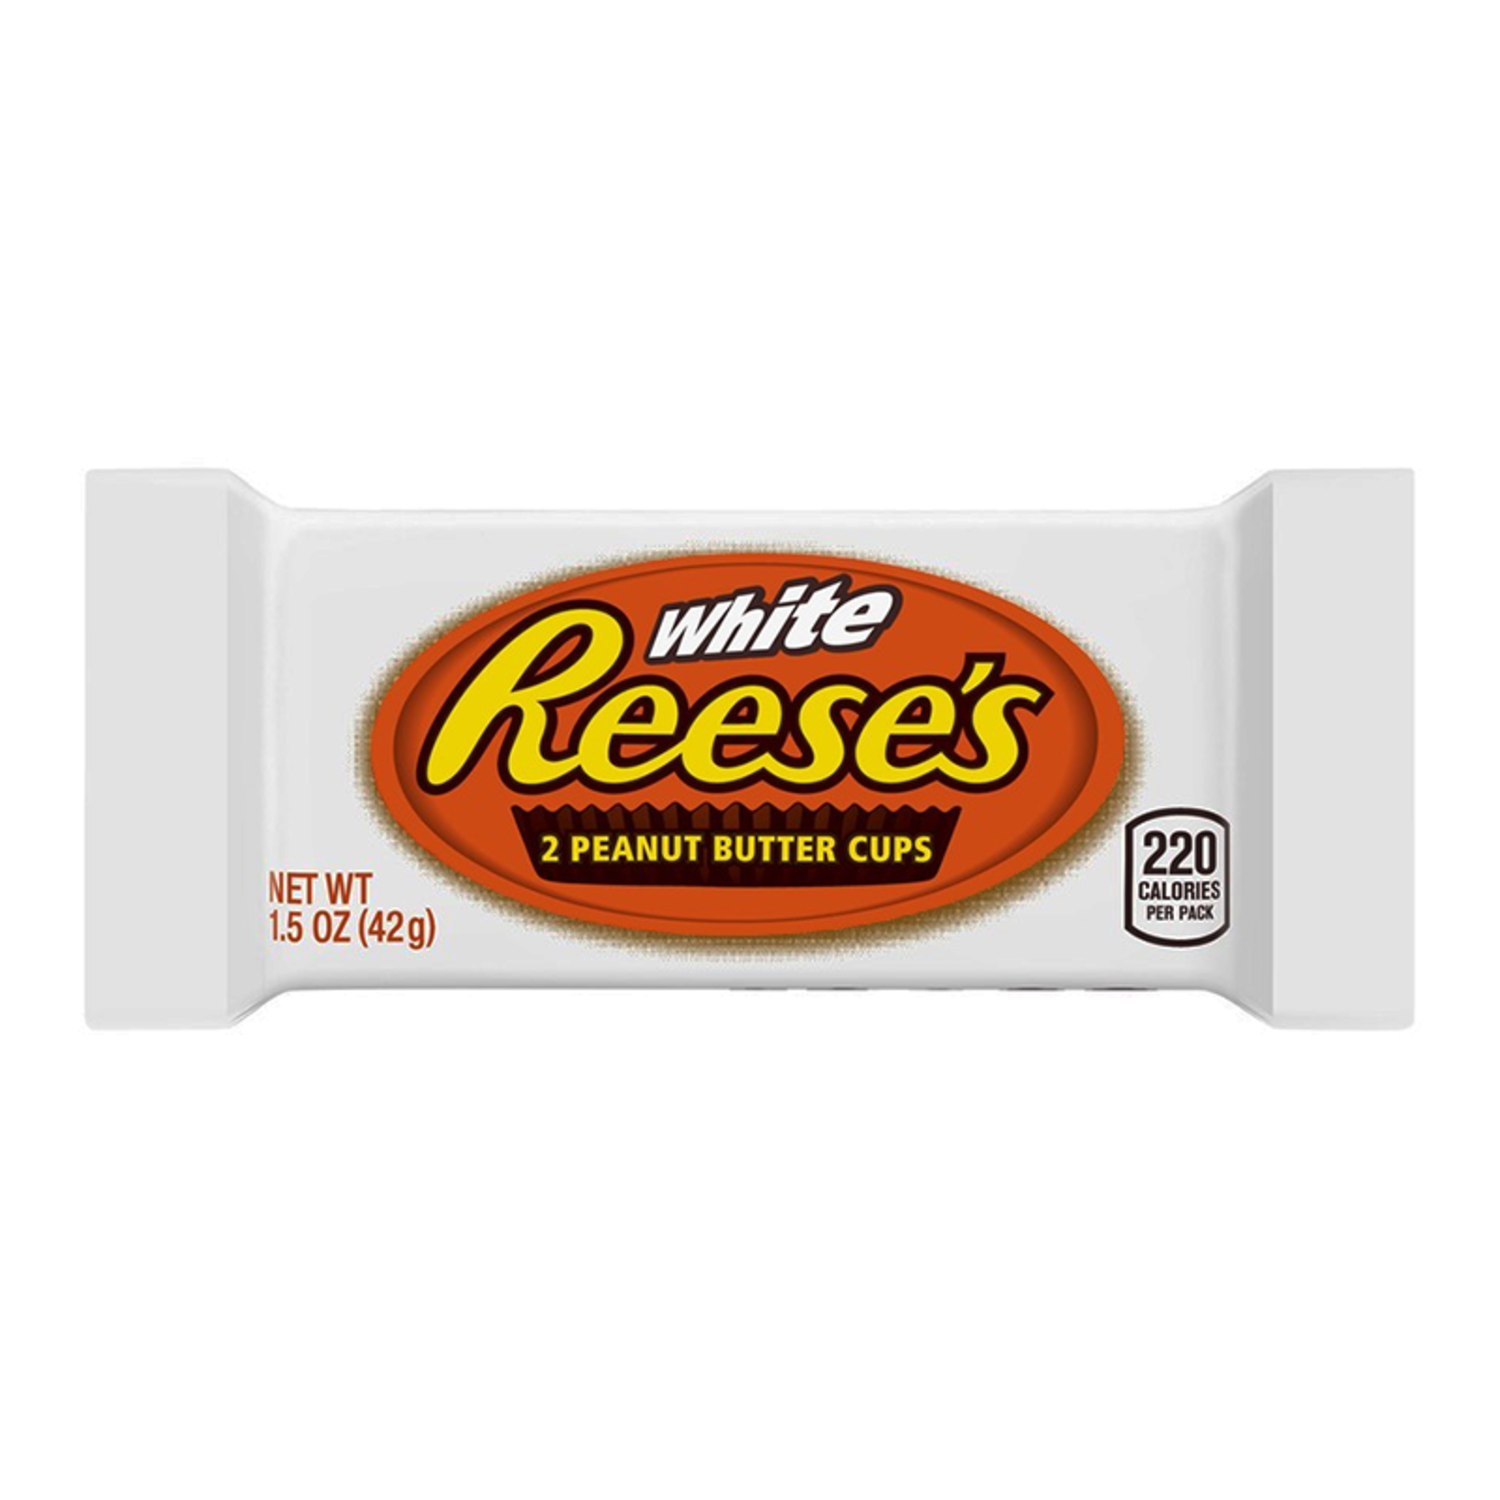 Reese's Peanut Butter Cups White Chocolate - My American Shop